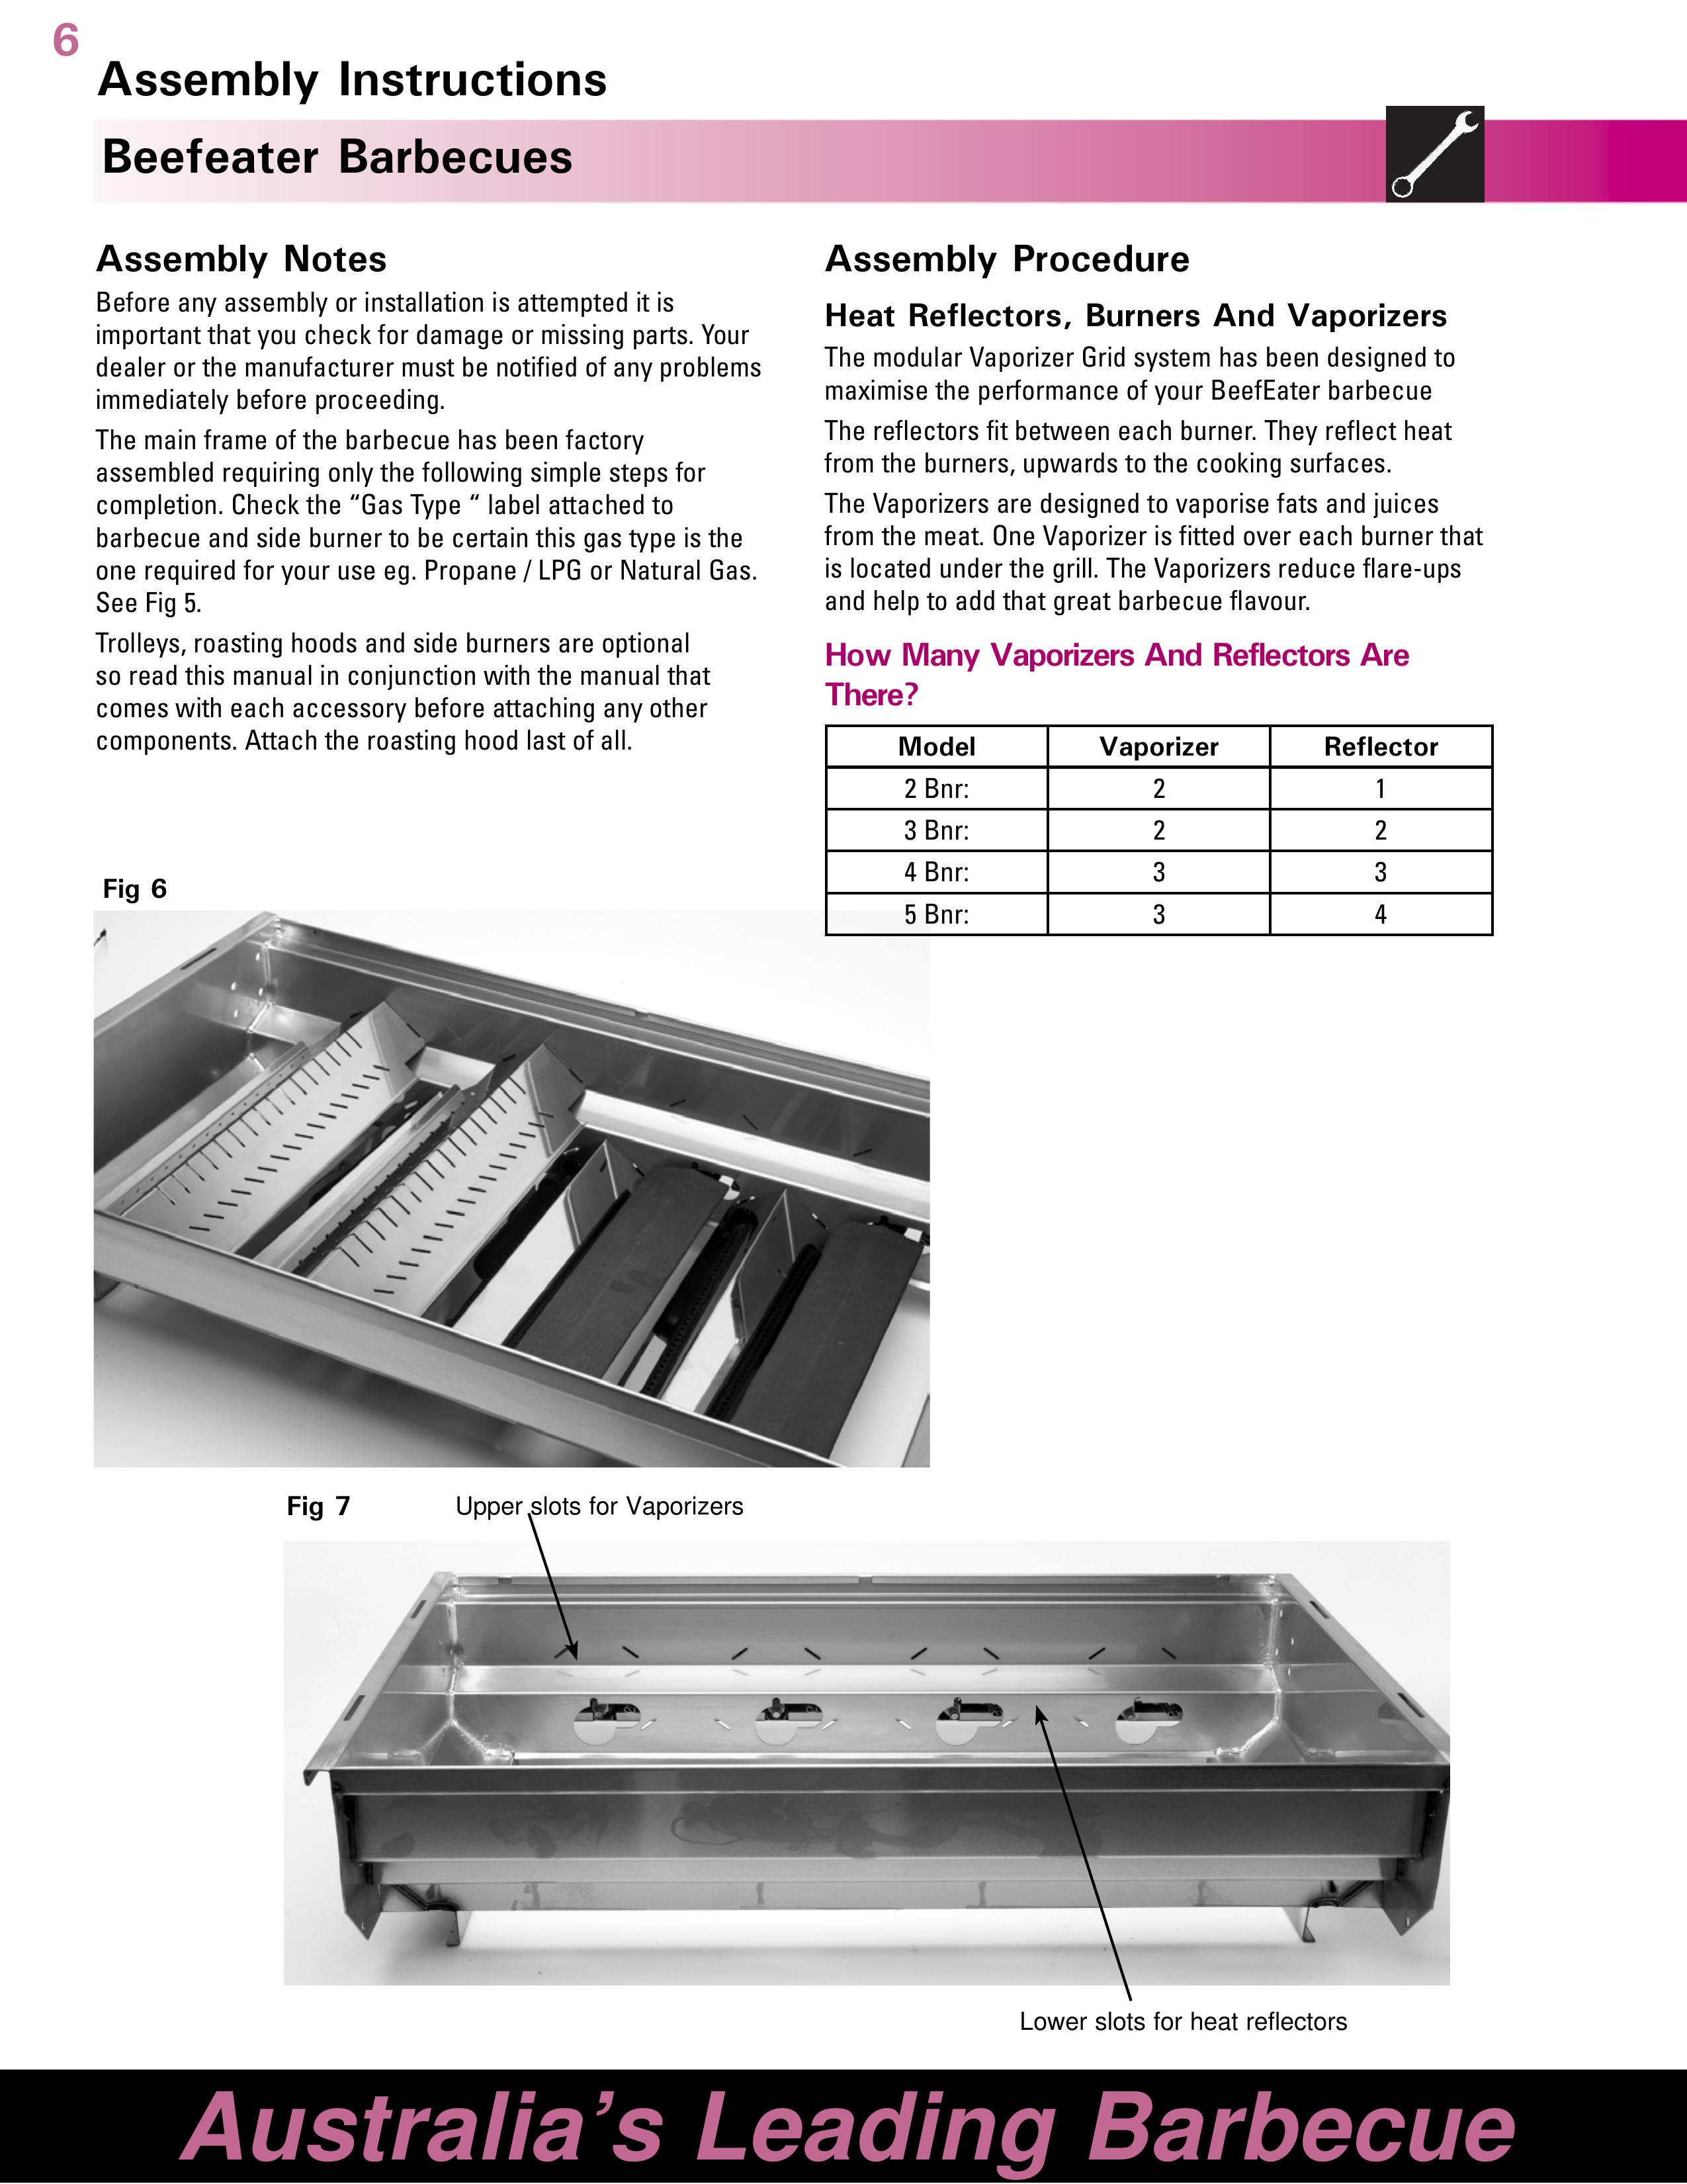 BeefEater Barbecue Gas Grill User Manual